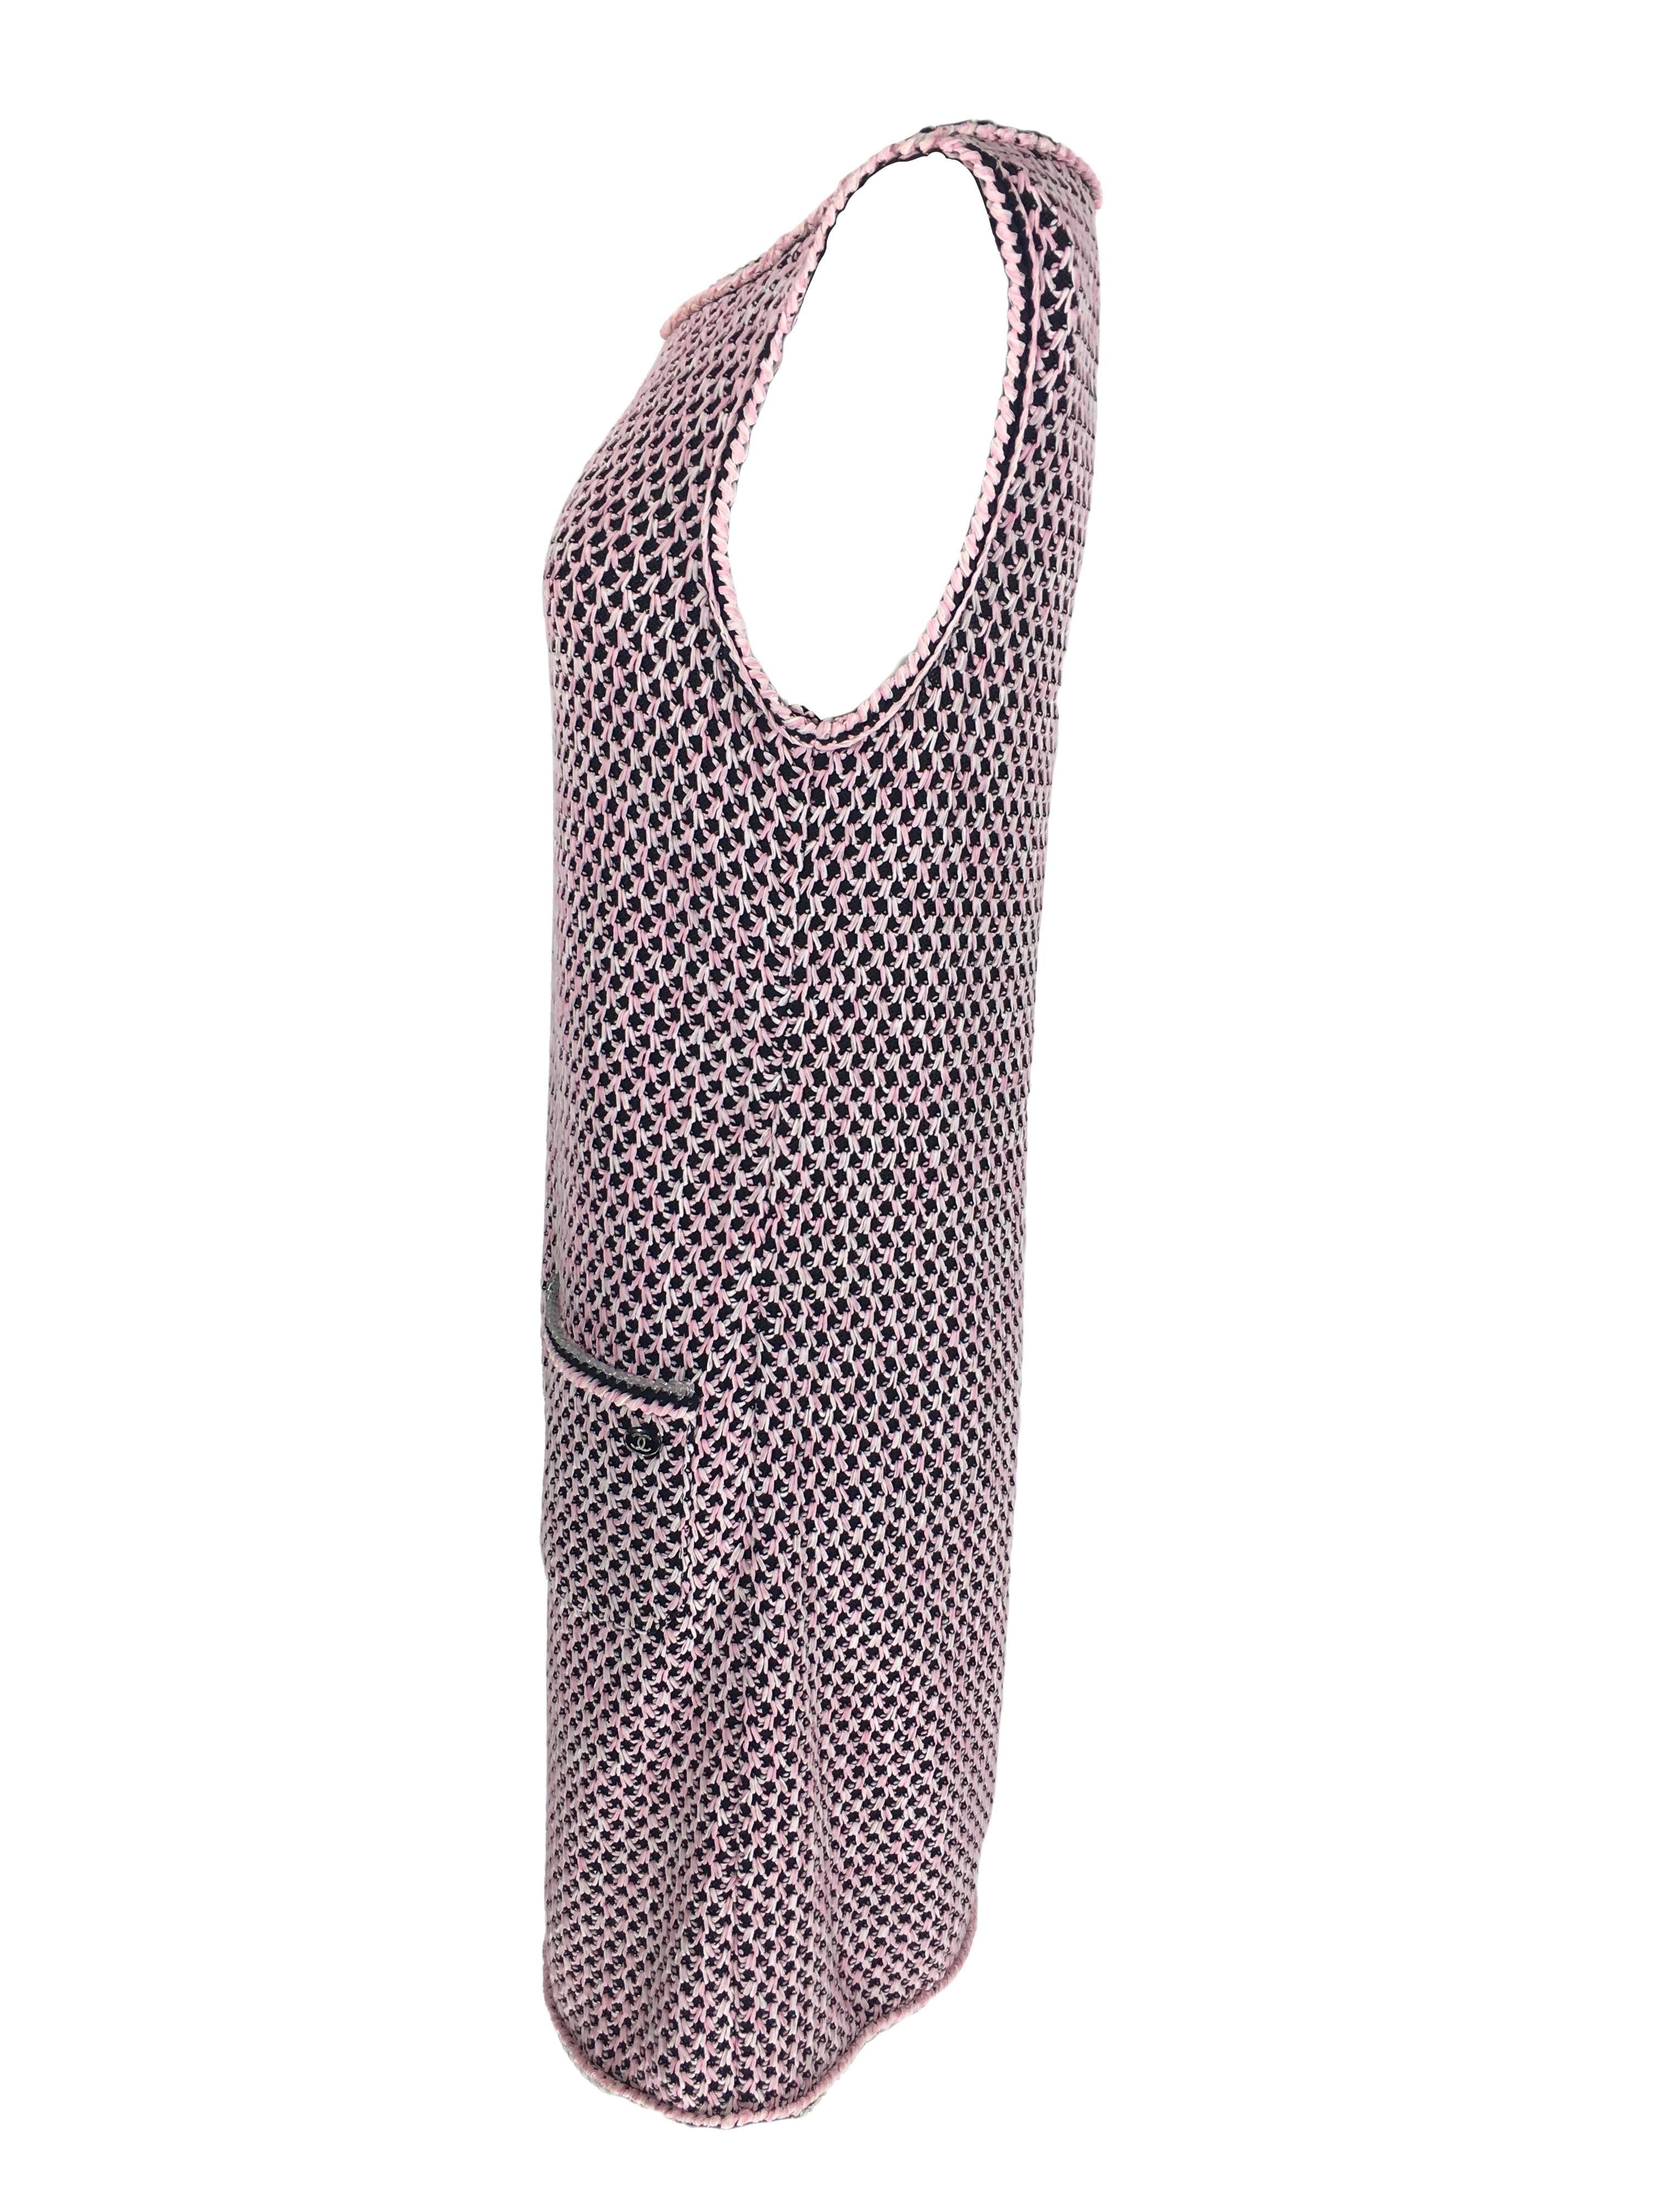 A  slip on sleeveless Cotton and Silk knit dress in pink/black/grey colors. Scoop neck, mid length and two front pockets and one cc logo button.